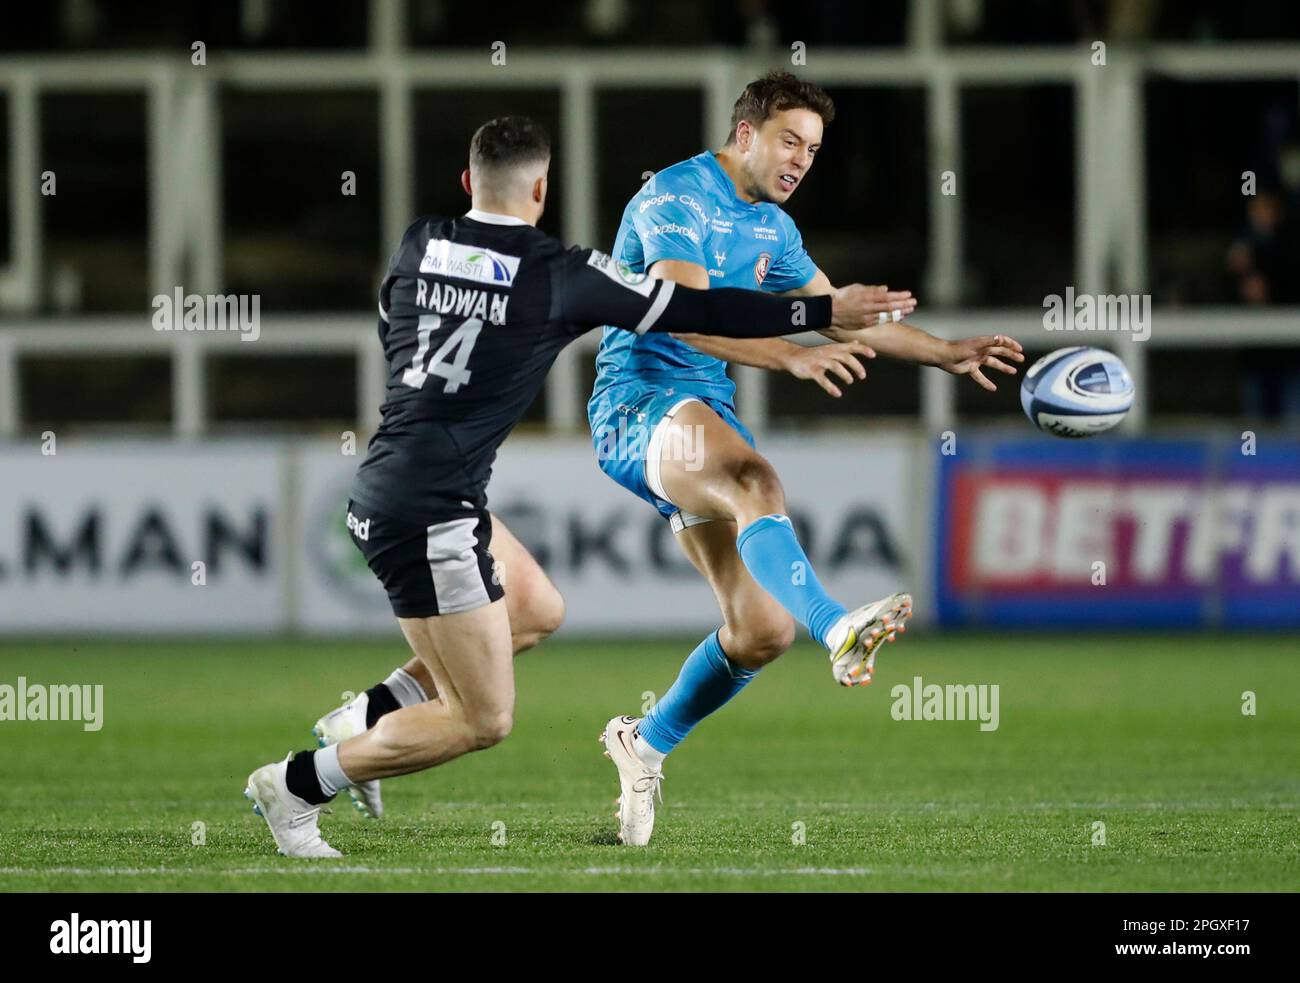 Newcastle Falcons' Adam Radwan (left) and Gloucester's Lewis Ludlow in action during the Gallagher Premiership match at Kingston Park, Newcastle upon Tyne. Picture date: Friday March 24, 2023. Stock Photo